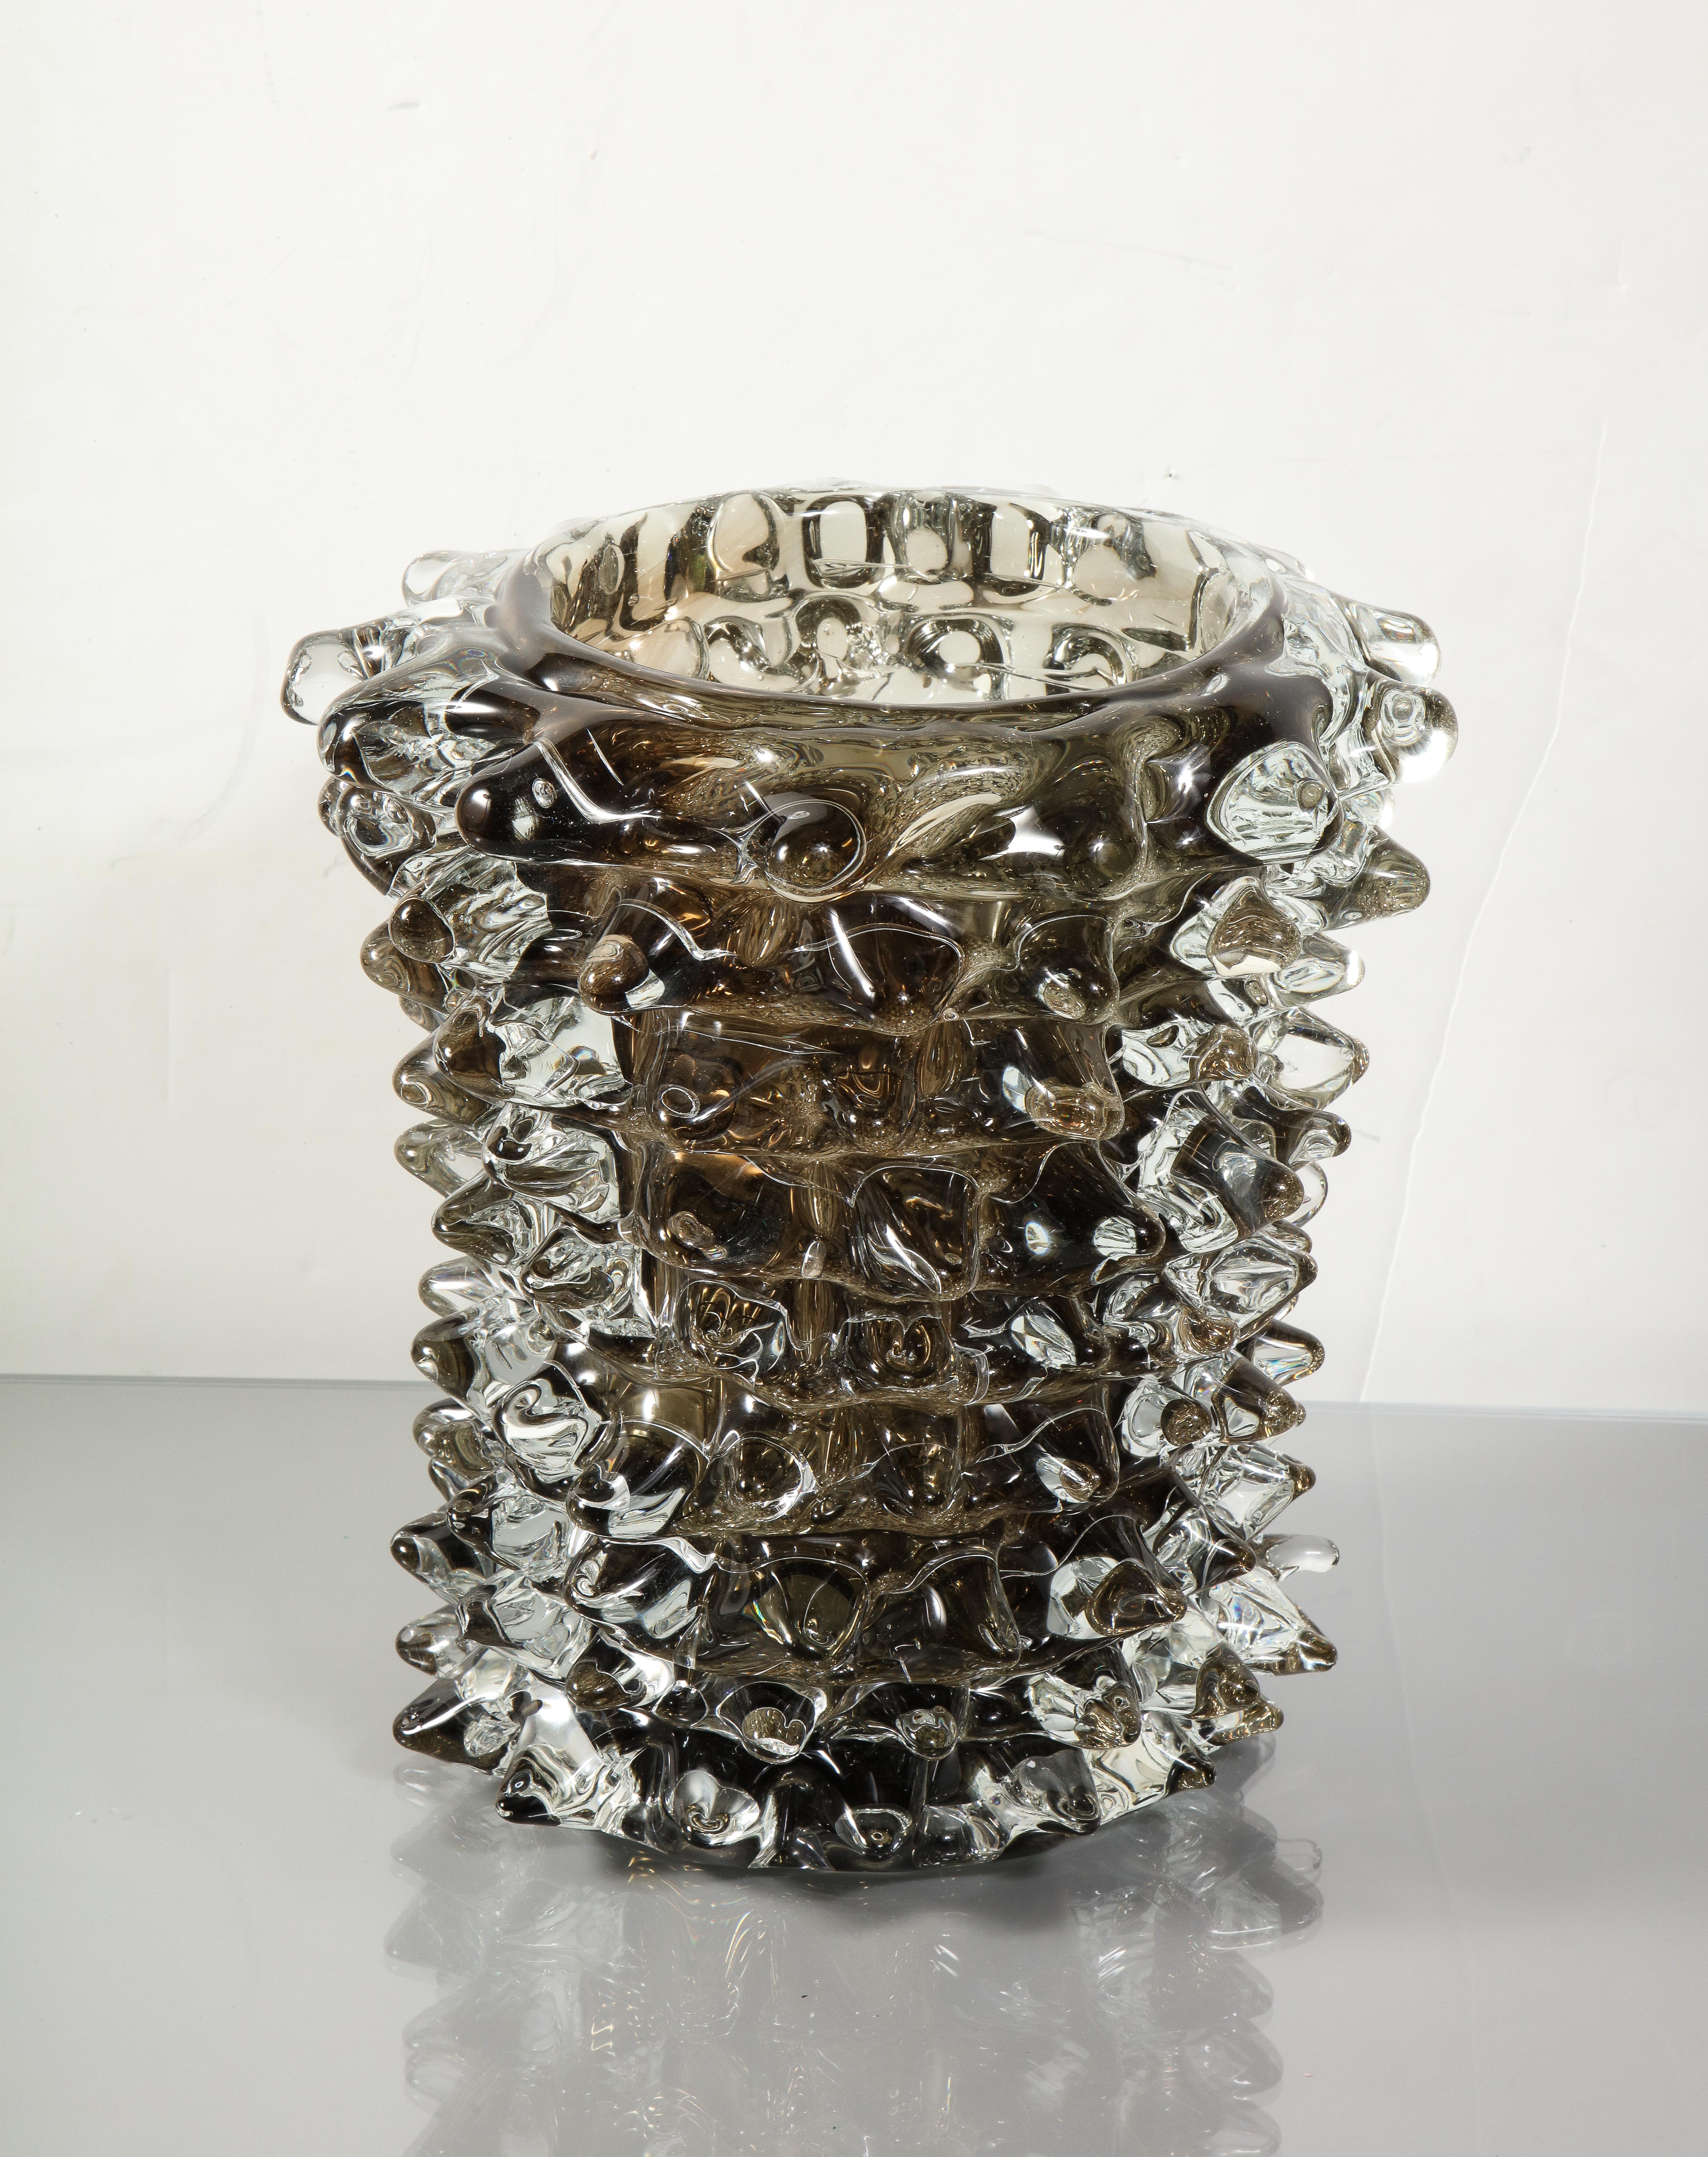 Hand-blown, mid-century style, smoke glass vase with spike design in the manner of Barovier, Italy.